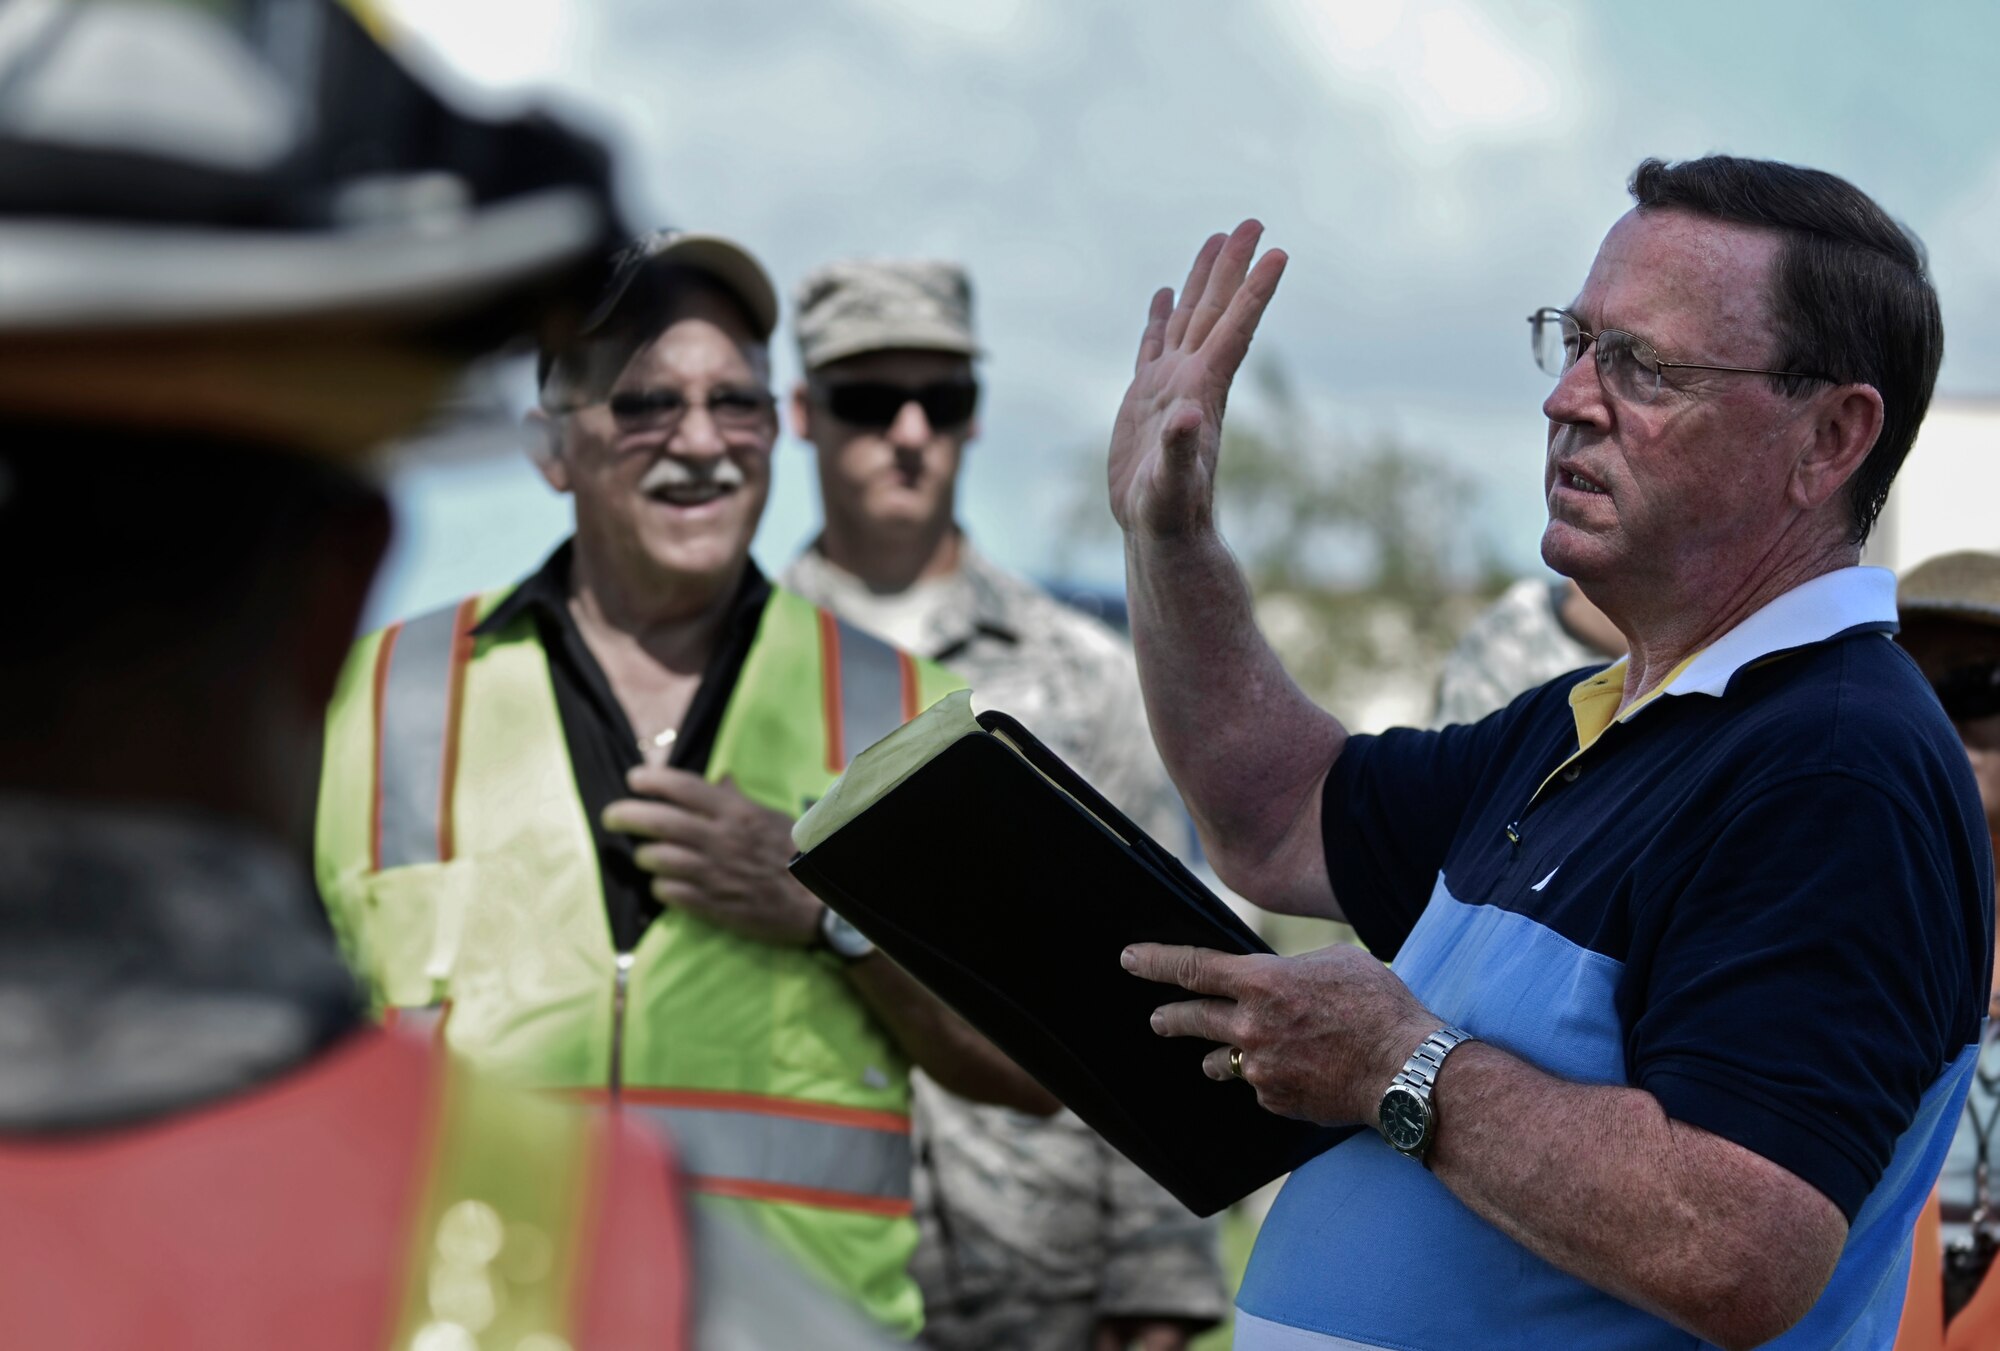 Michael Donohoe, ¬¬ Defense Logistics Agency preparedness and planning head contractor, discuss Team Andersen’s performance during the annual multi-agency fuel spill response training event Sept. 26, 2013, at the 36th Logistics Squadron Fuels Management Flight compound on Andersen Air Force Base, Guam. The training was conducted to comply with the provisions of the Oil Pollution Act of 1990, which states parties responsible for a vessel or facility from which oil or fuel is discharged and poses a substantial threat of a spill must have a plan to prevent spills that may occur and a detailed containment and cleanup plan. (U.S. Air Force photo by Senior Airman Marianique Santos/Released) 